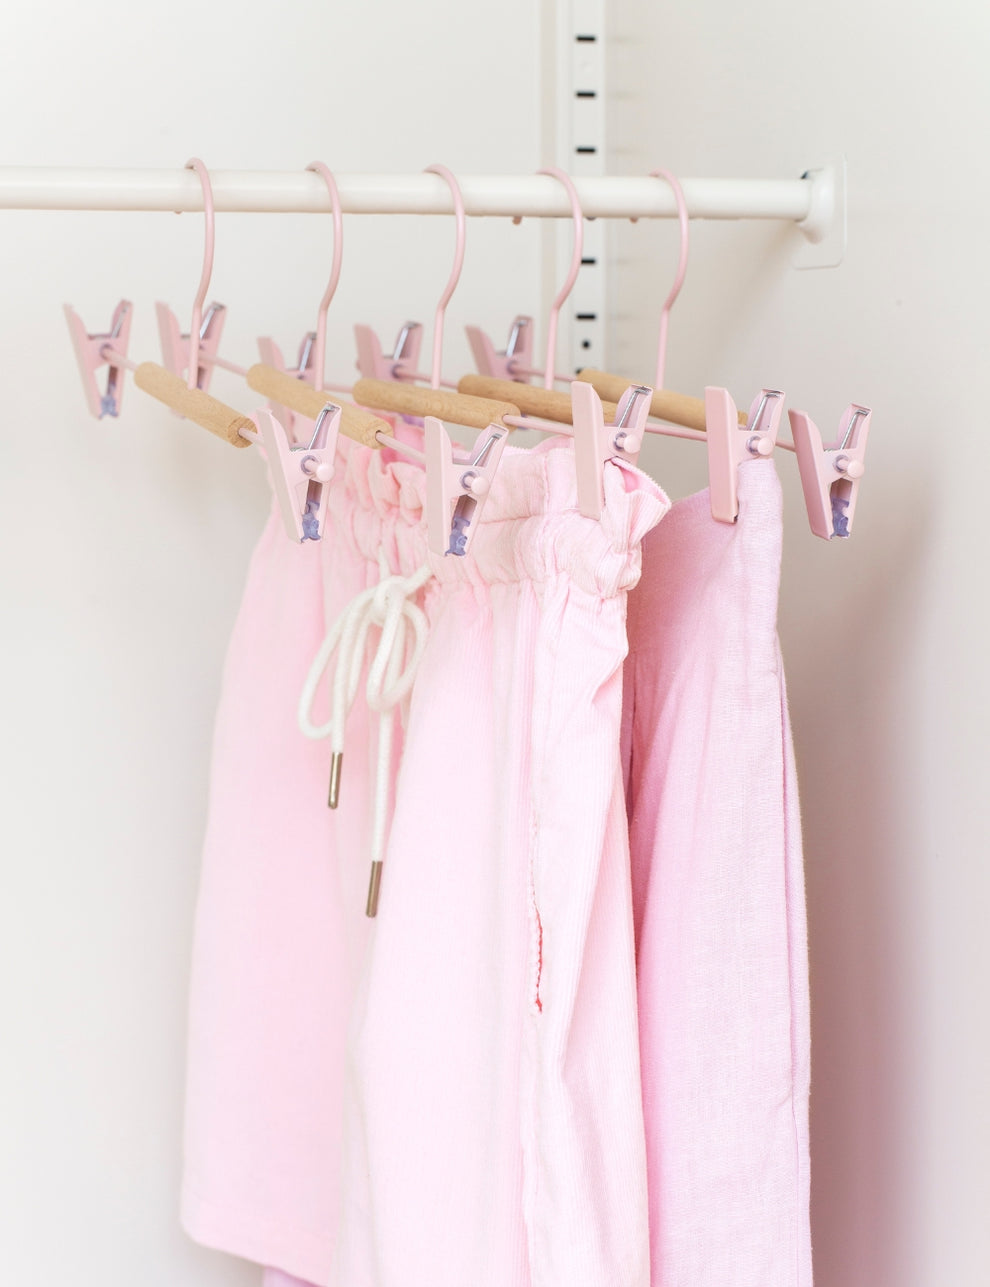 Adult Clip Hangers in Blush